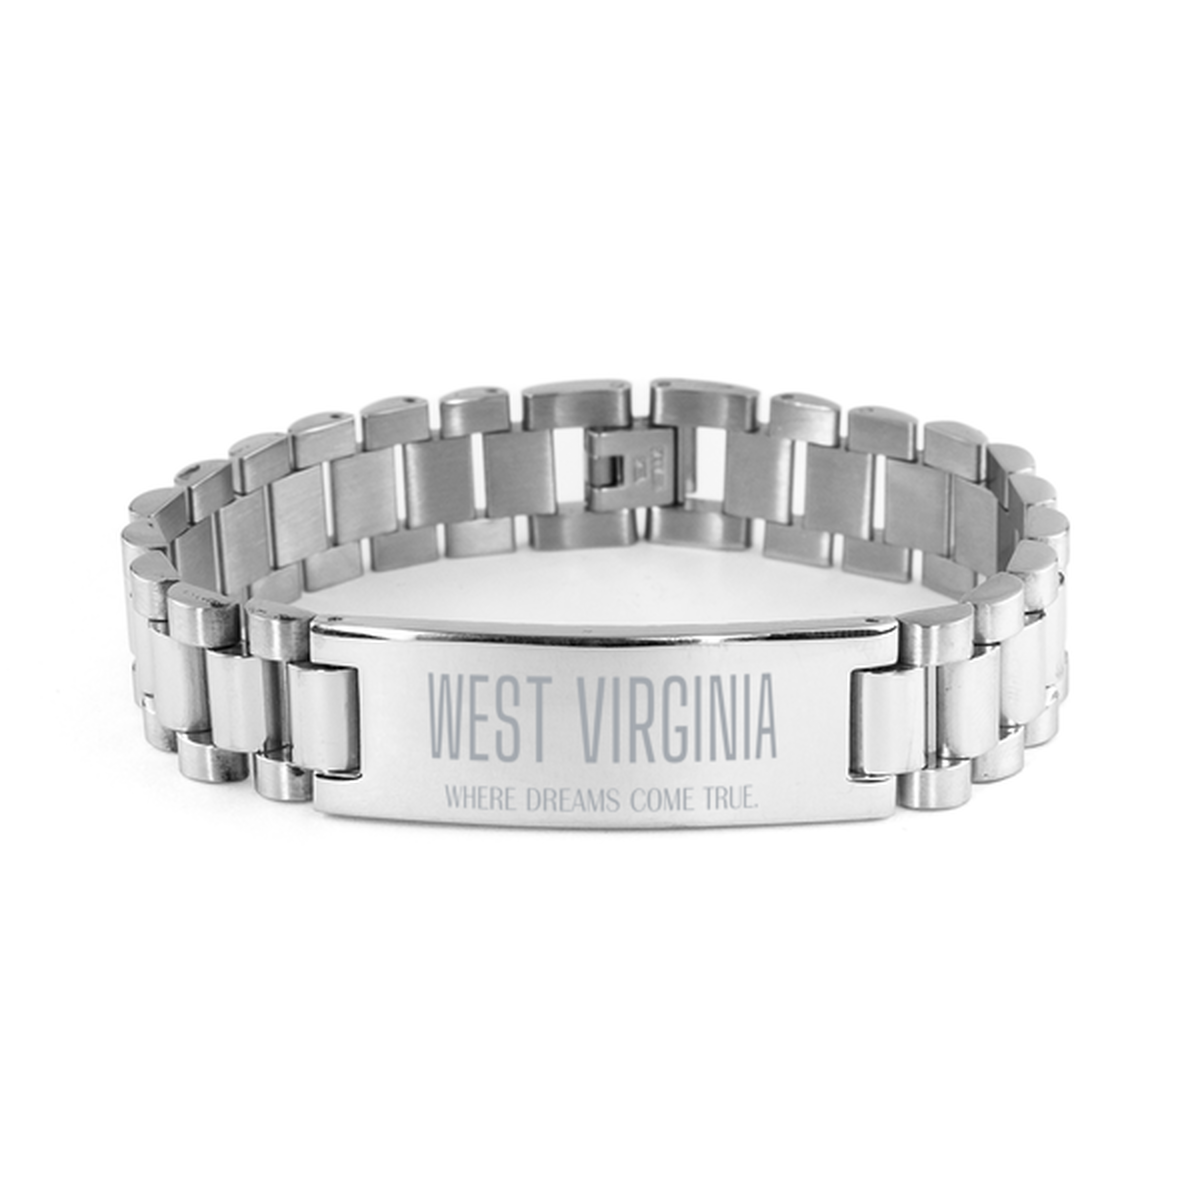 Love West Virginia State Ladder Stainless Steel Bracelet, West Virginia Where dreams come true, Birthday Inspirational Gifts For West Virginia Men, Women, Friends